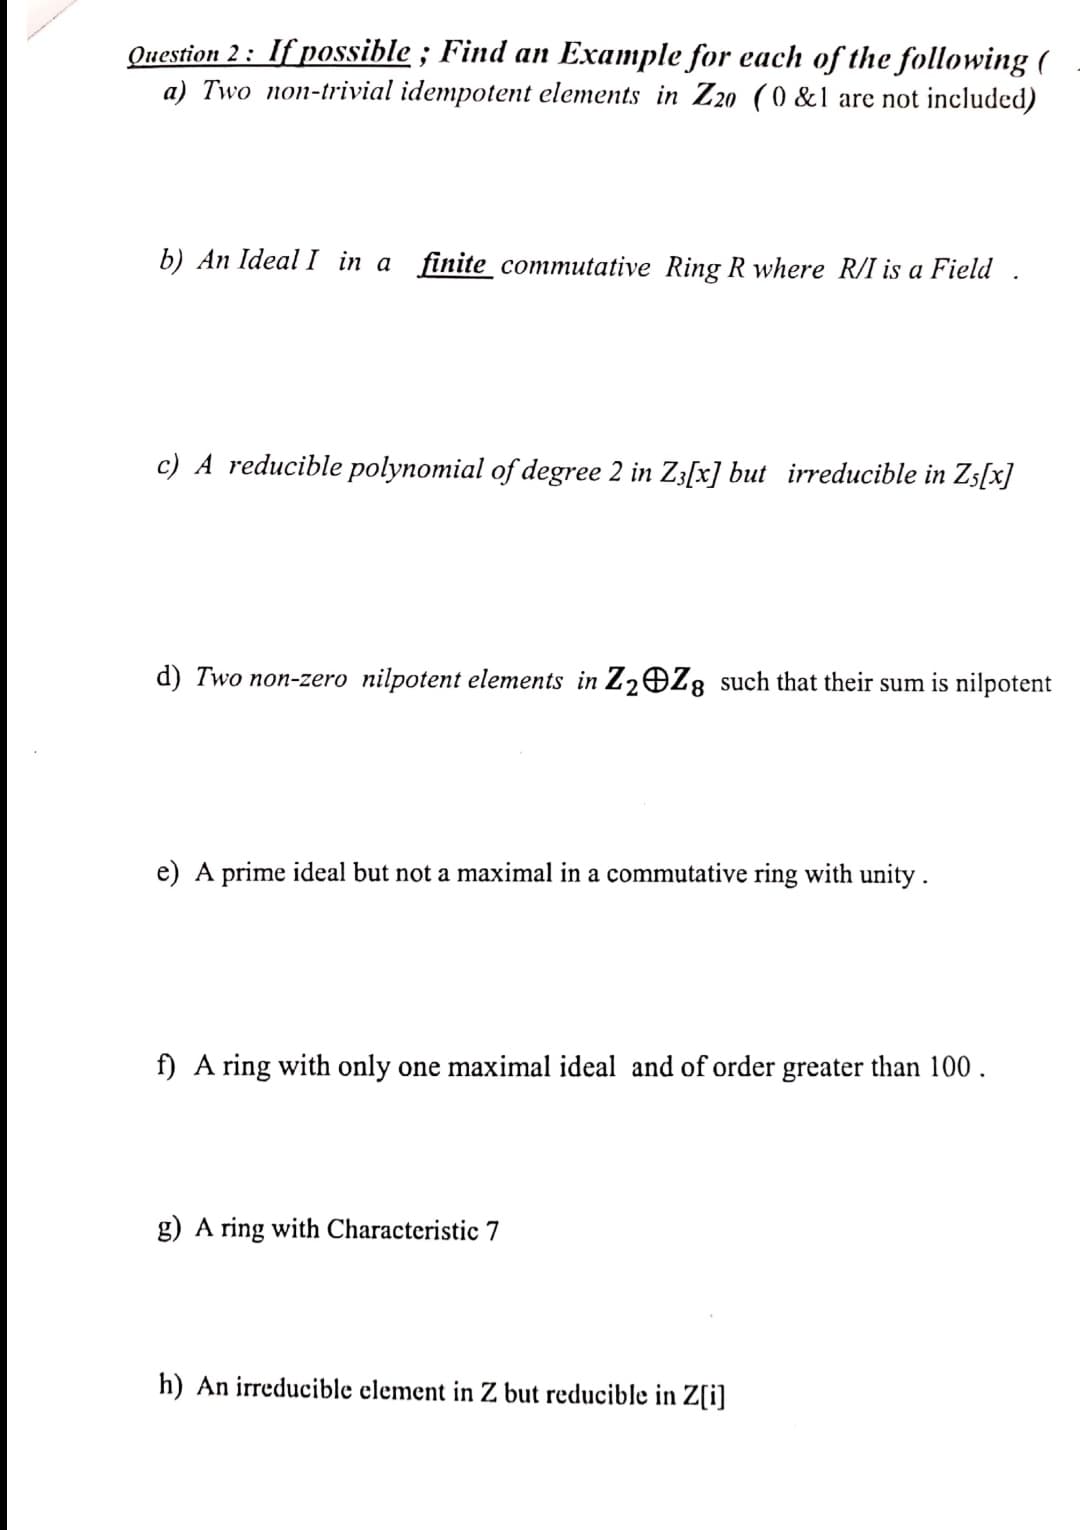 Question 2: If possible; Find an Example for each of the following (
a) Two non-trivial idempotent elements in Z20 (0 &1 are not included)
b) An Ideal I in a finite commutative Ring R where R/I is a Field
c) A reducible polynomial of degree 2 in Z3[x] but irreducible in Z5[x]
d) Two non-zero nilpotent elements in Z₂ Z8 such that their sum is nilpotent
e) A prime ideal but not a maximal in a commutative ring with unity.
f) A ring with only one maximal ideal and of order greater than 100.
g) A ring with Characteristic 7
h) An irreducible element in Z but reducible in Z[i]